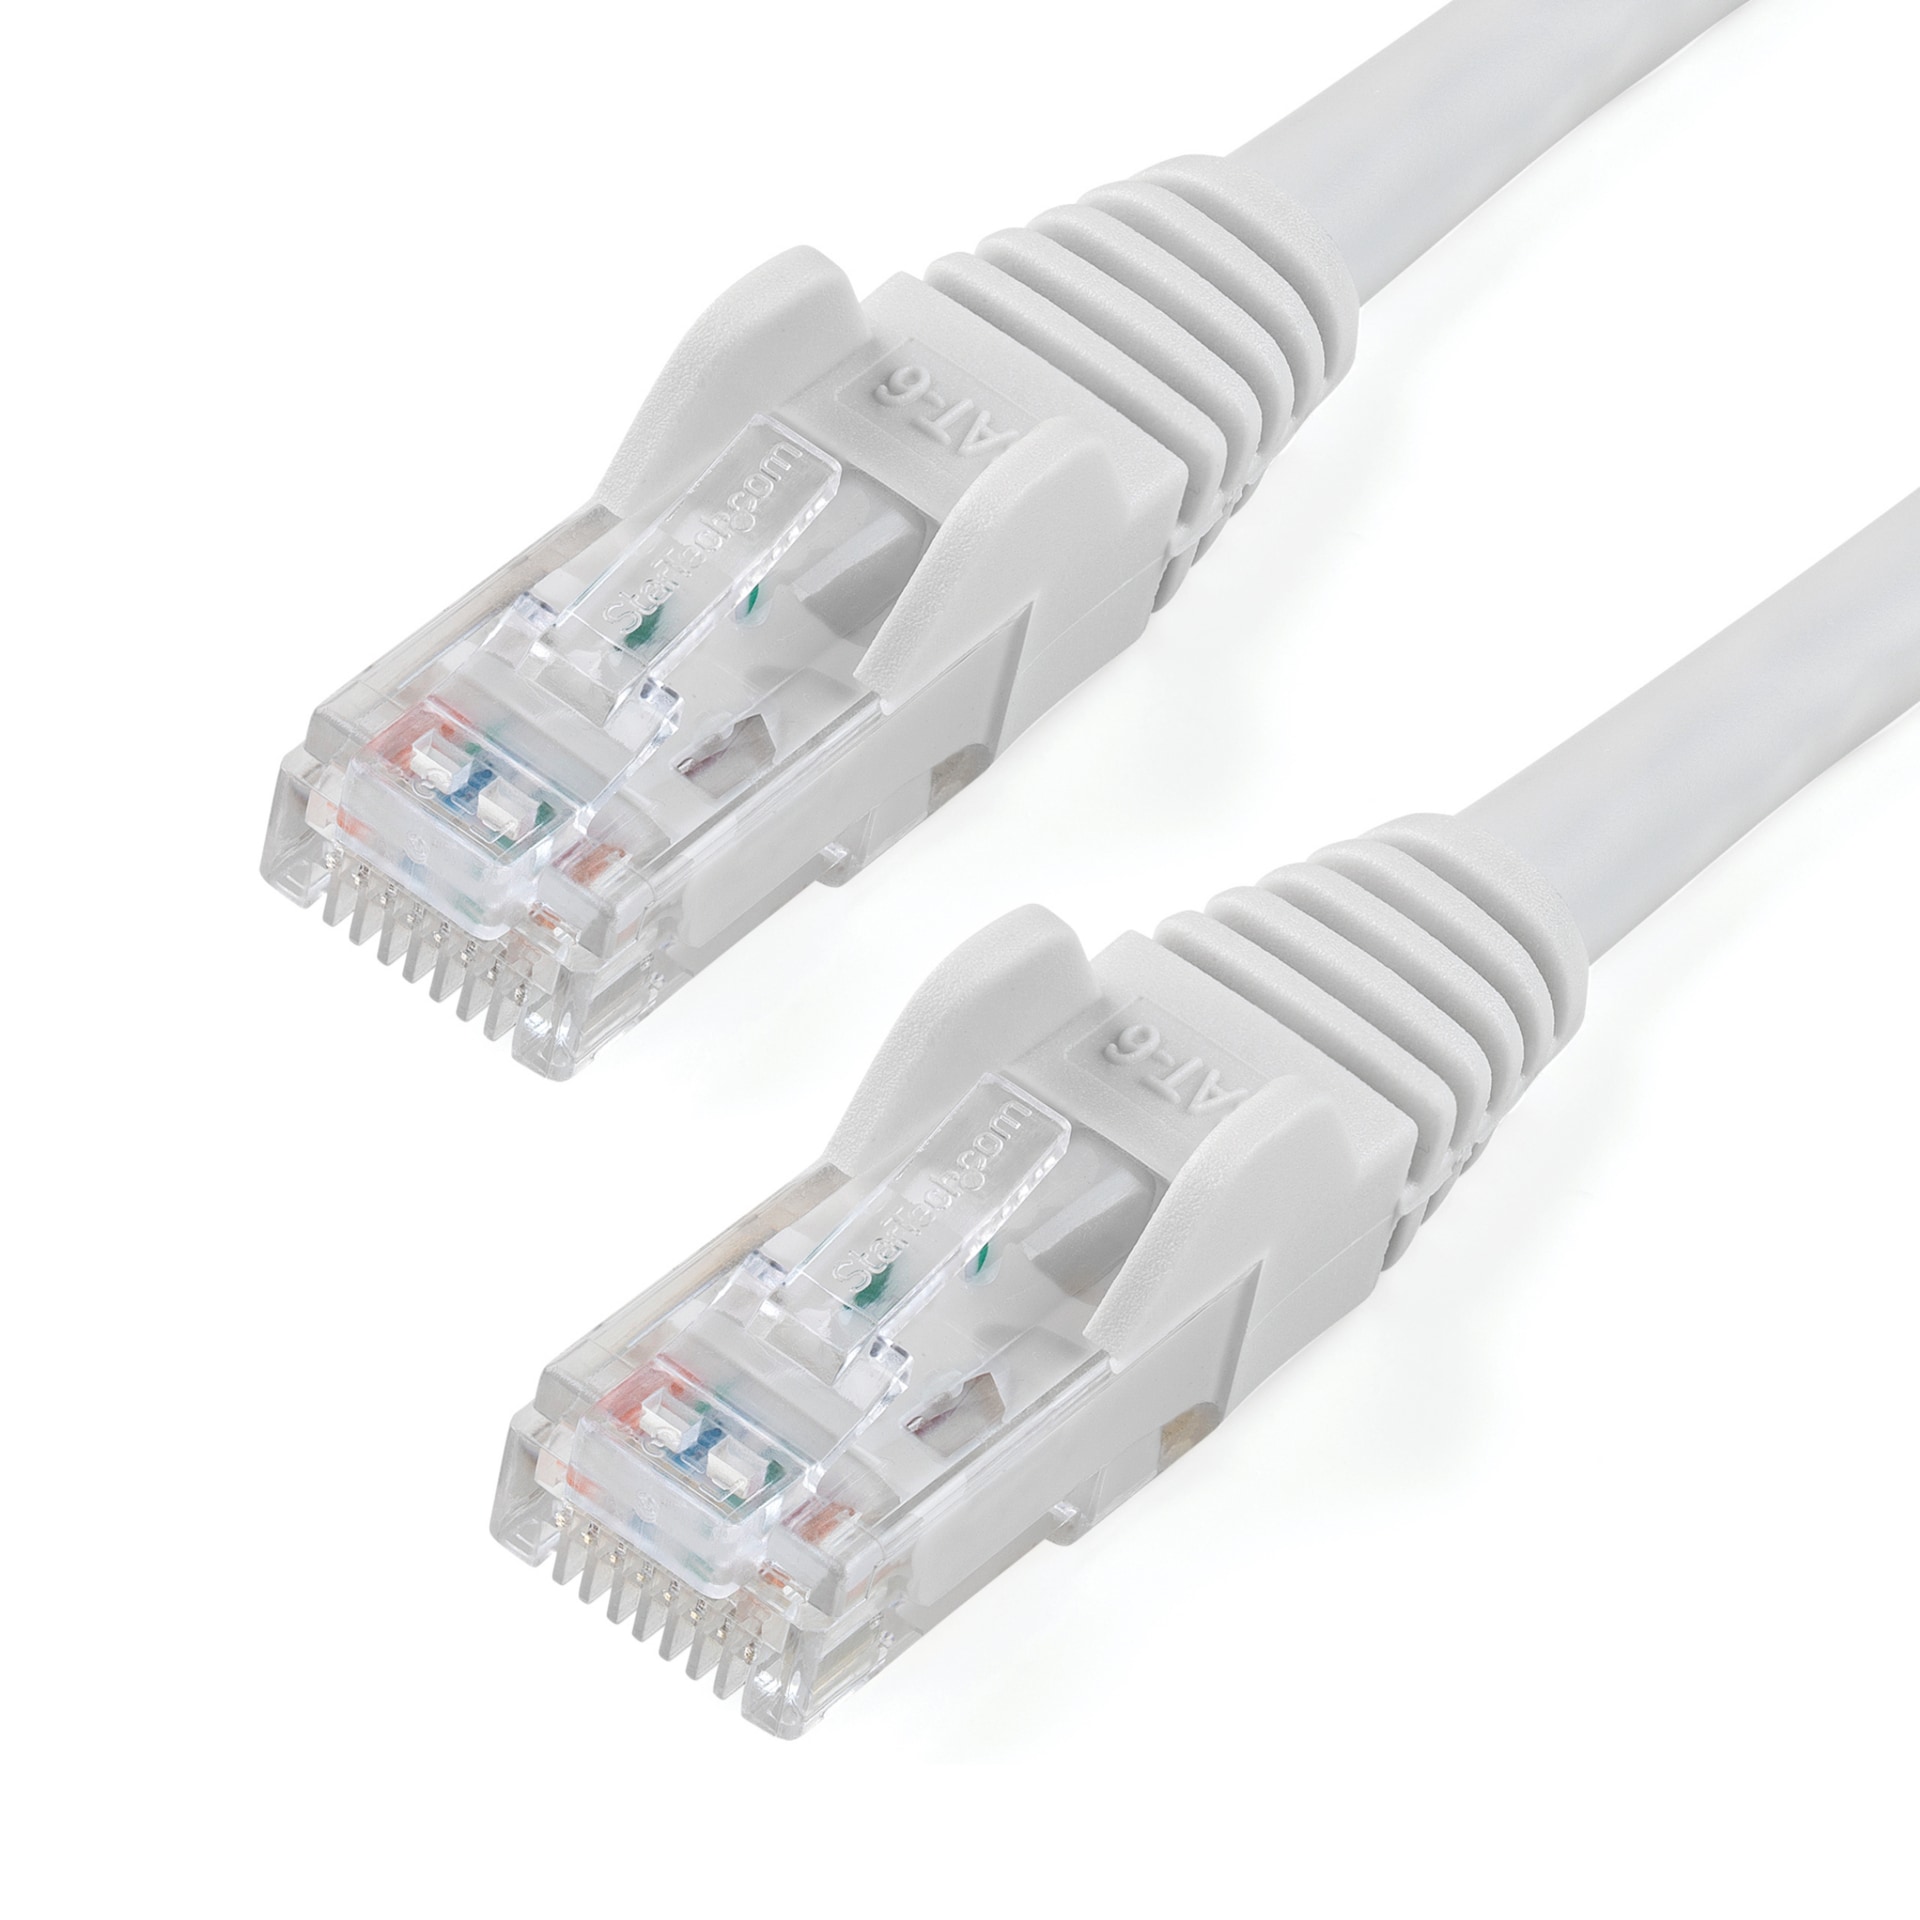 StarTech.com CAT6 Ethernet Cable 35' White 650MHz PoE Snagless Patch Cord